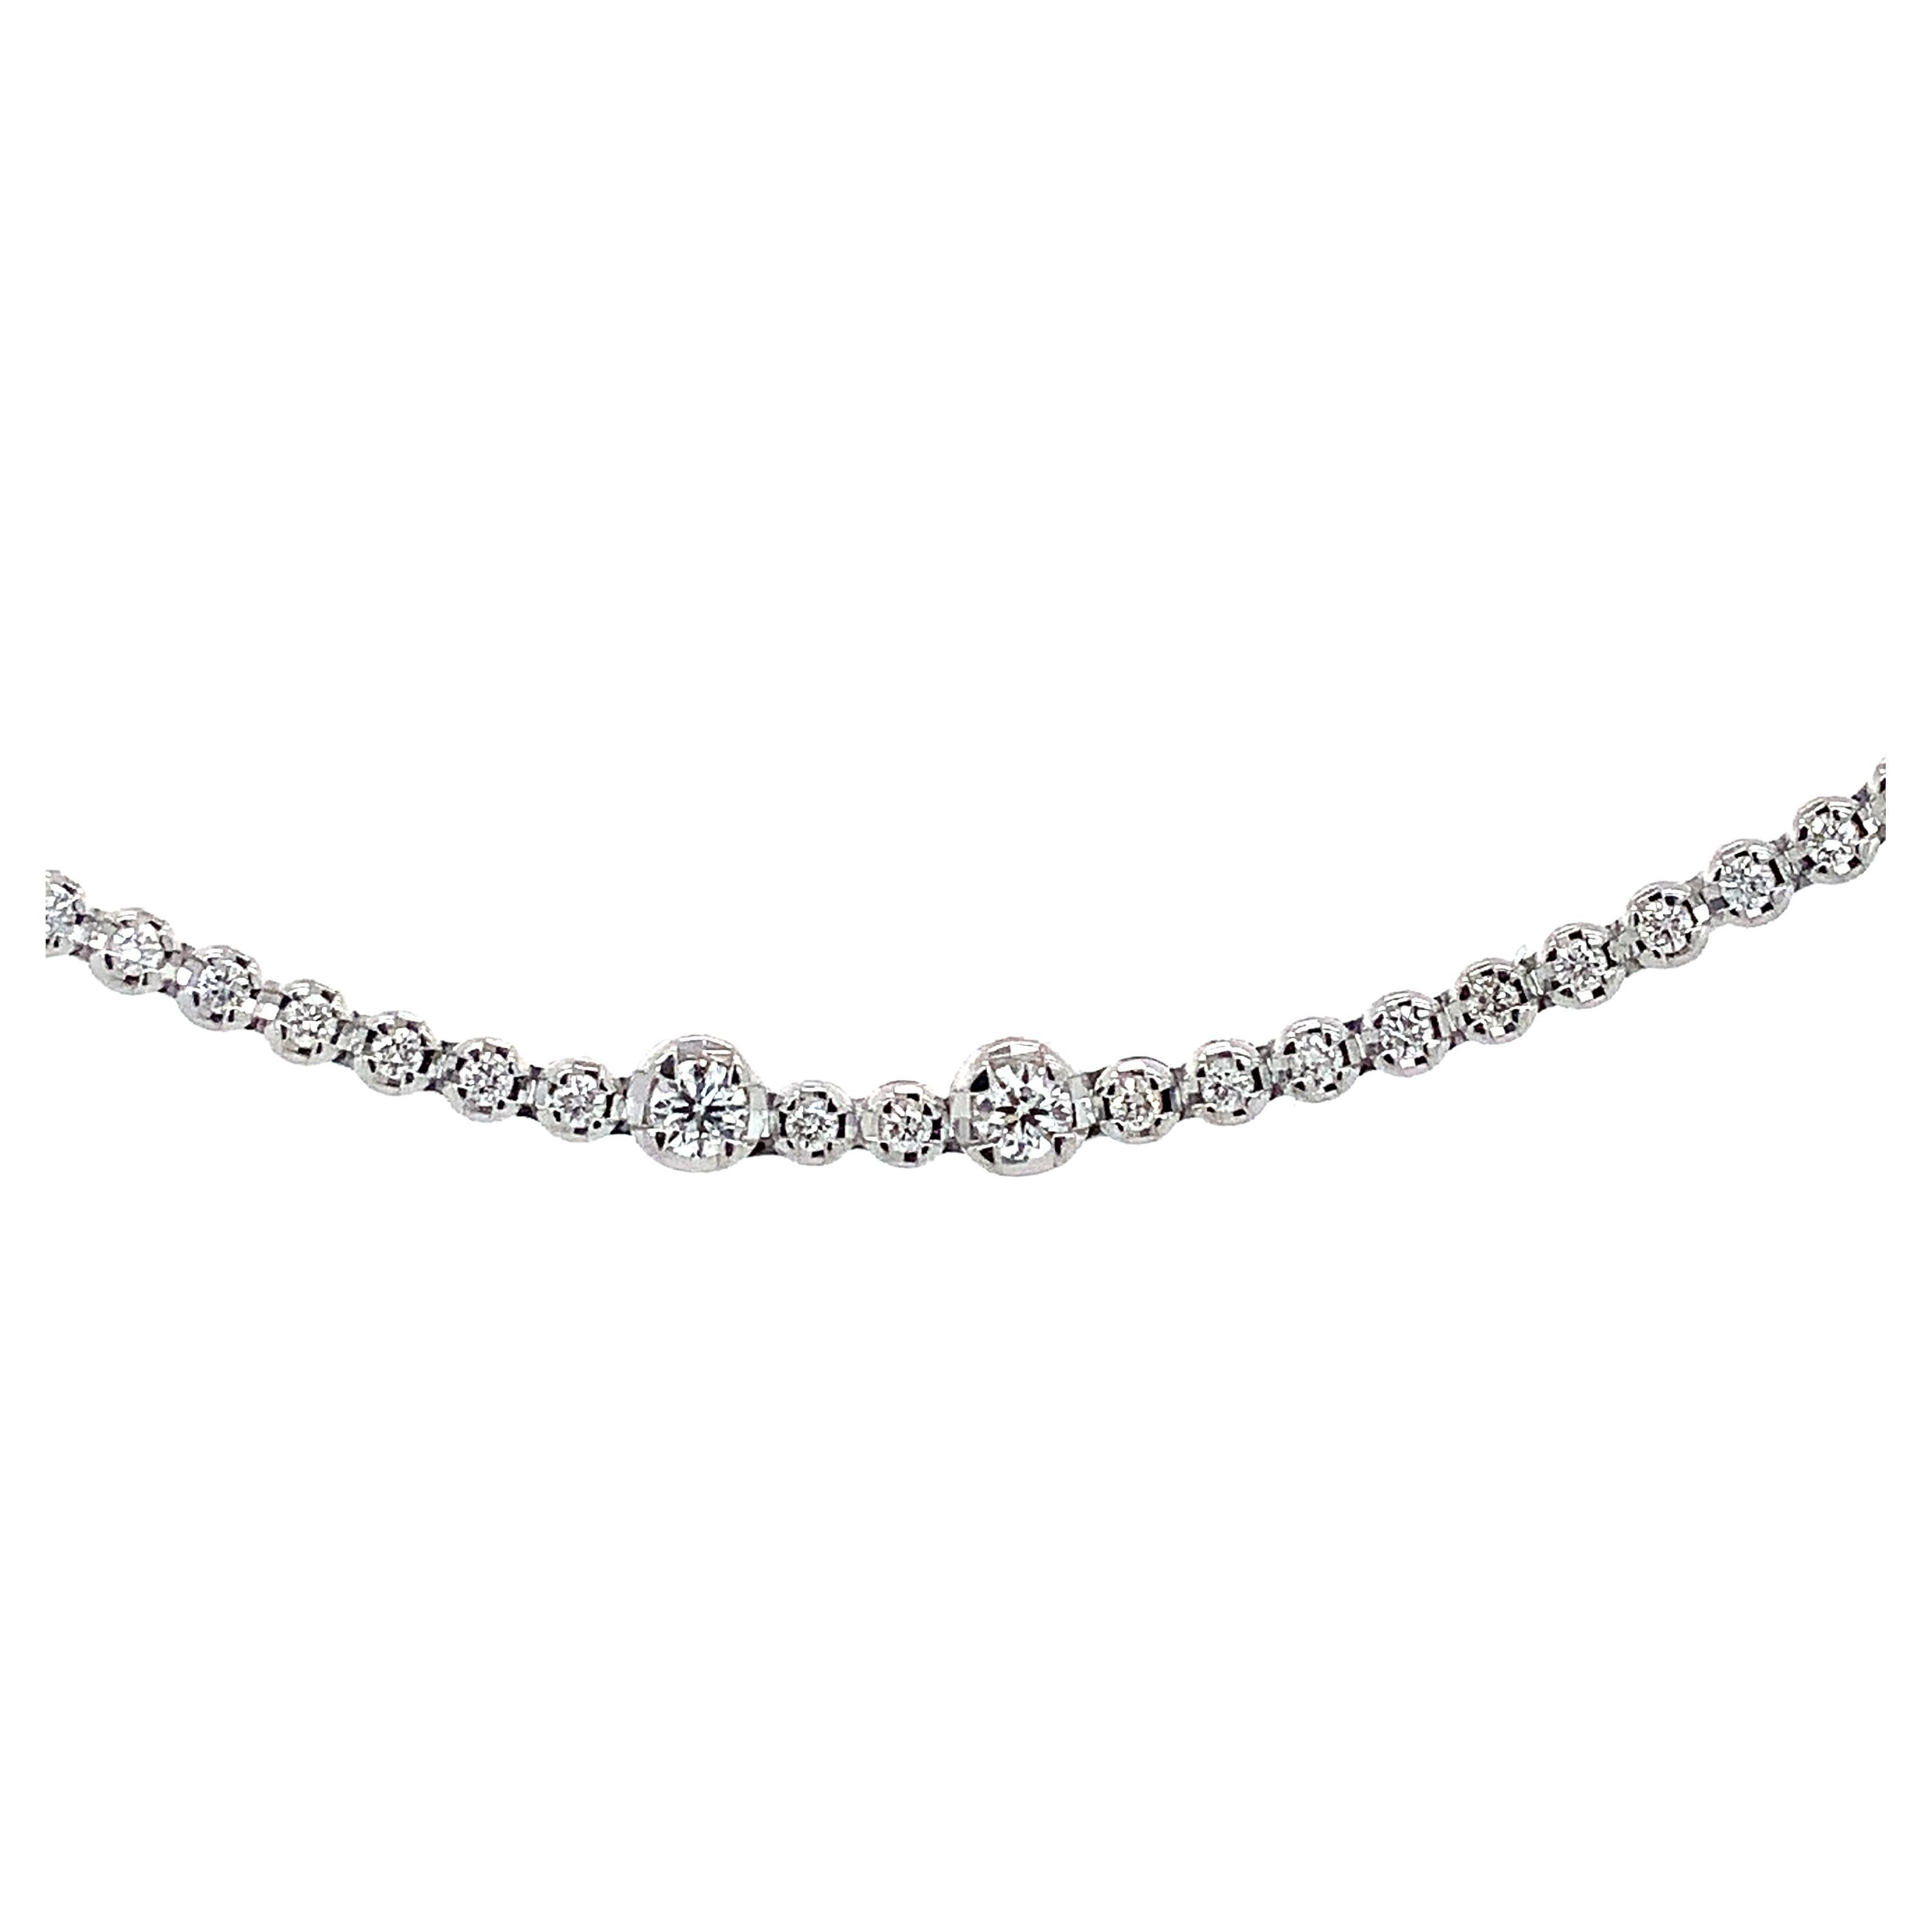 This A Link Collection diamond chain necklace boasts a 32-inch opera length design, boasting 238 round brilliant cut diamonds and a total carat weight of 3.66 cts. tw. Classified as F-VS1 in quality, it has dimensions of 2.5 mm in width and 4 mm in